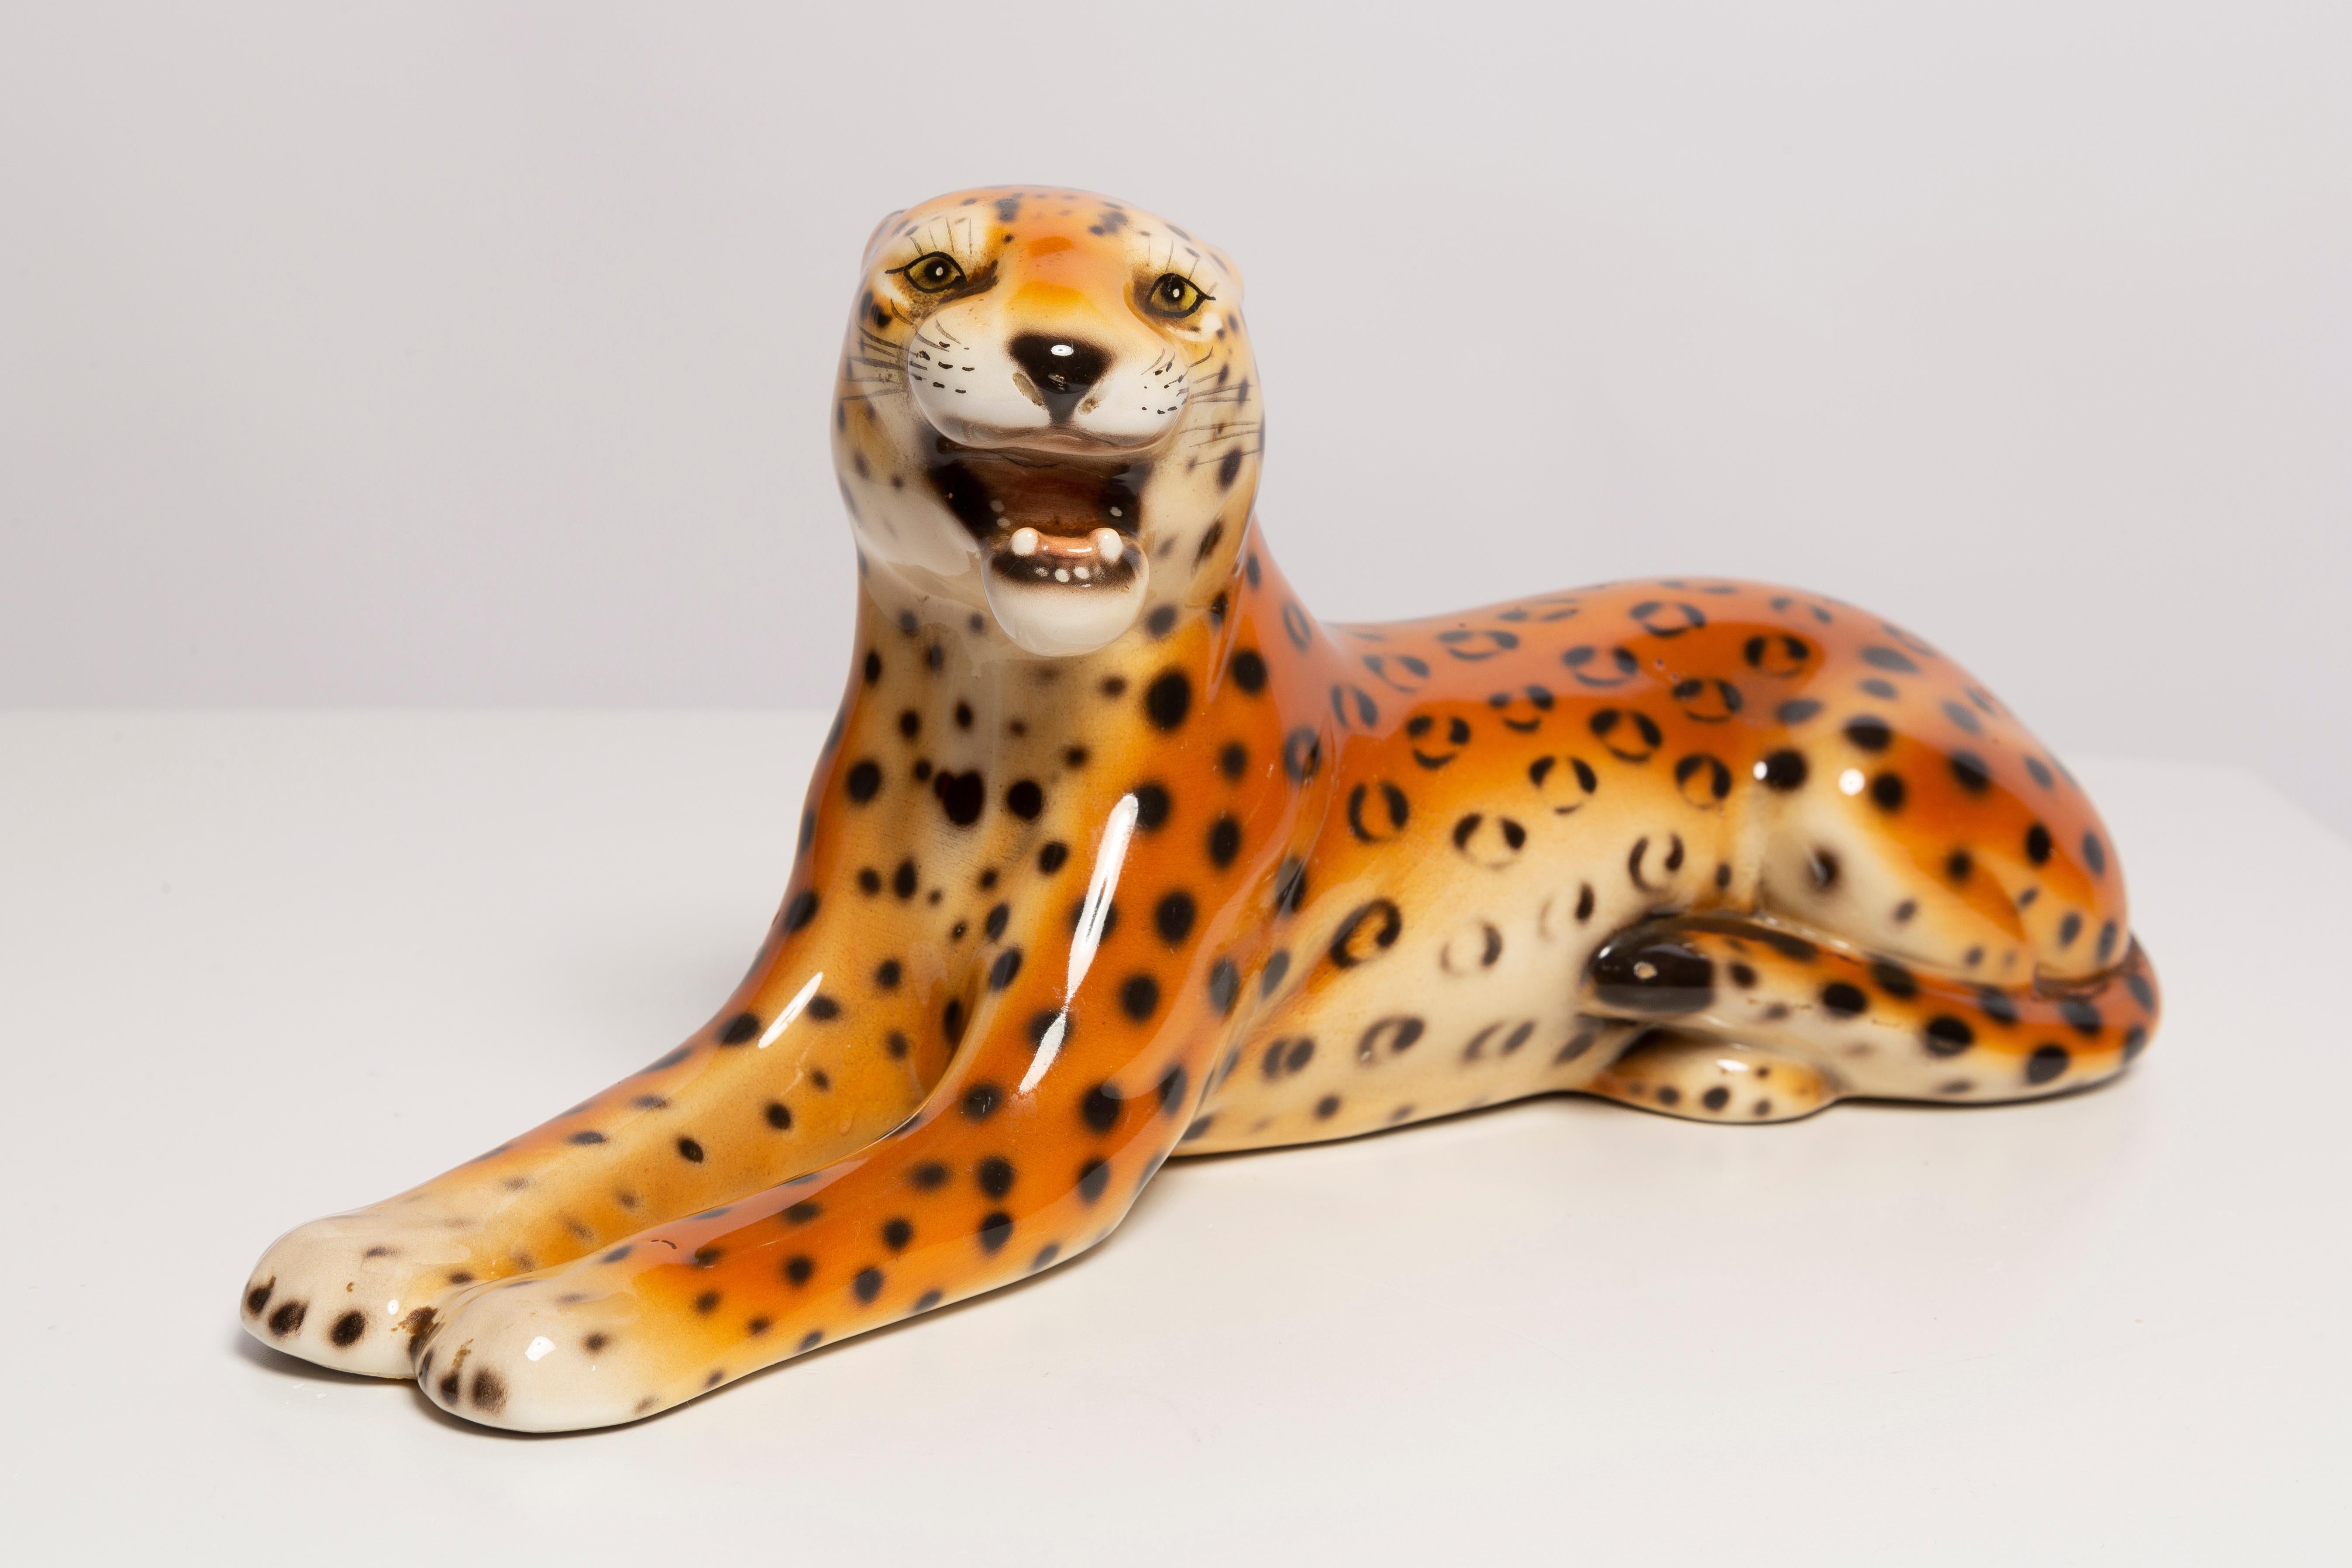 Italian ceramic, perfect condition, produced in 1960s. We have also another big cats for sale, check our products. Only one unique piece available.